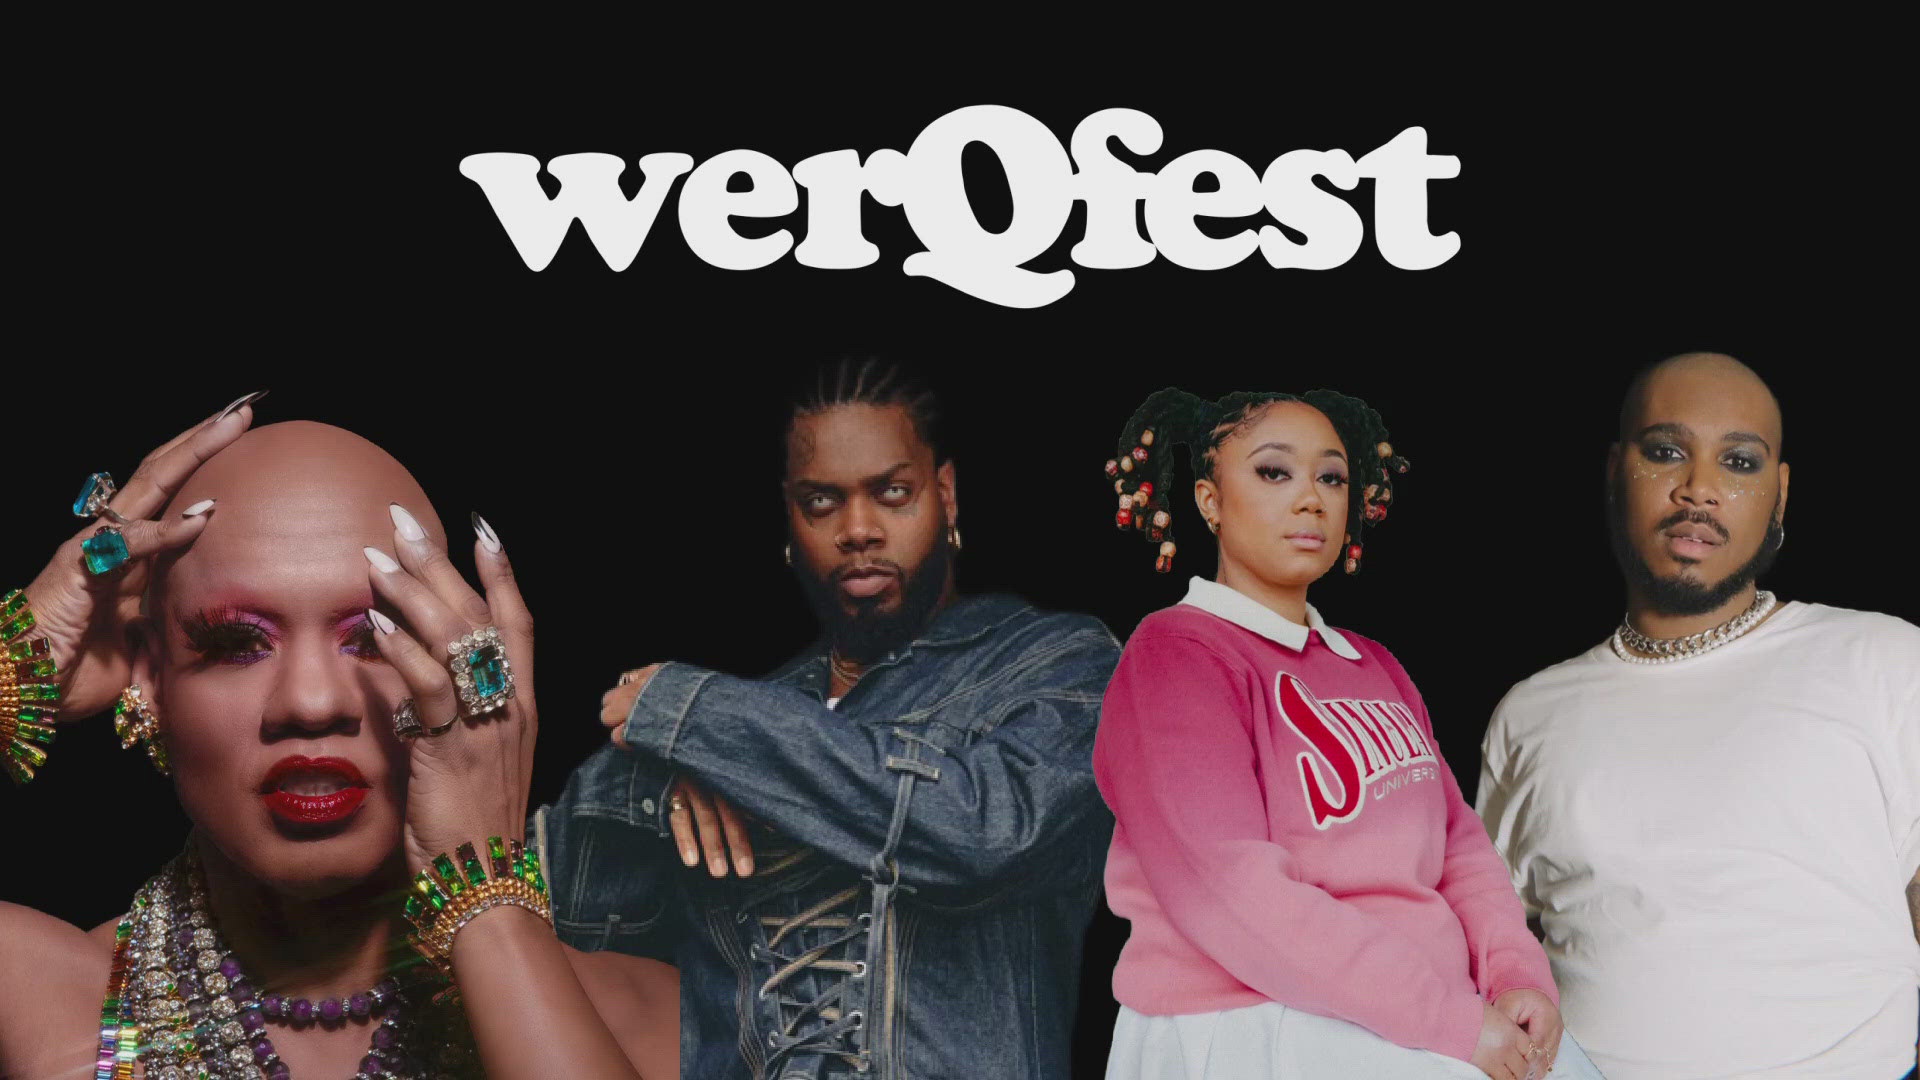 The founder of WerQfest visited Today in St. Louis Weekend Edition to share about the event highlighting the black queer, trans and non-binary community in the area.